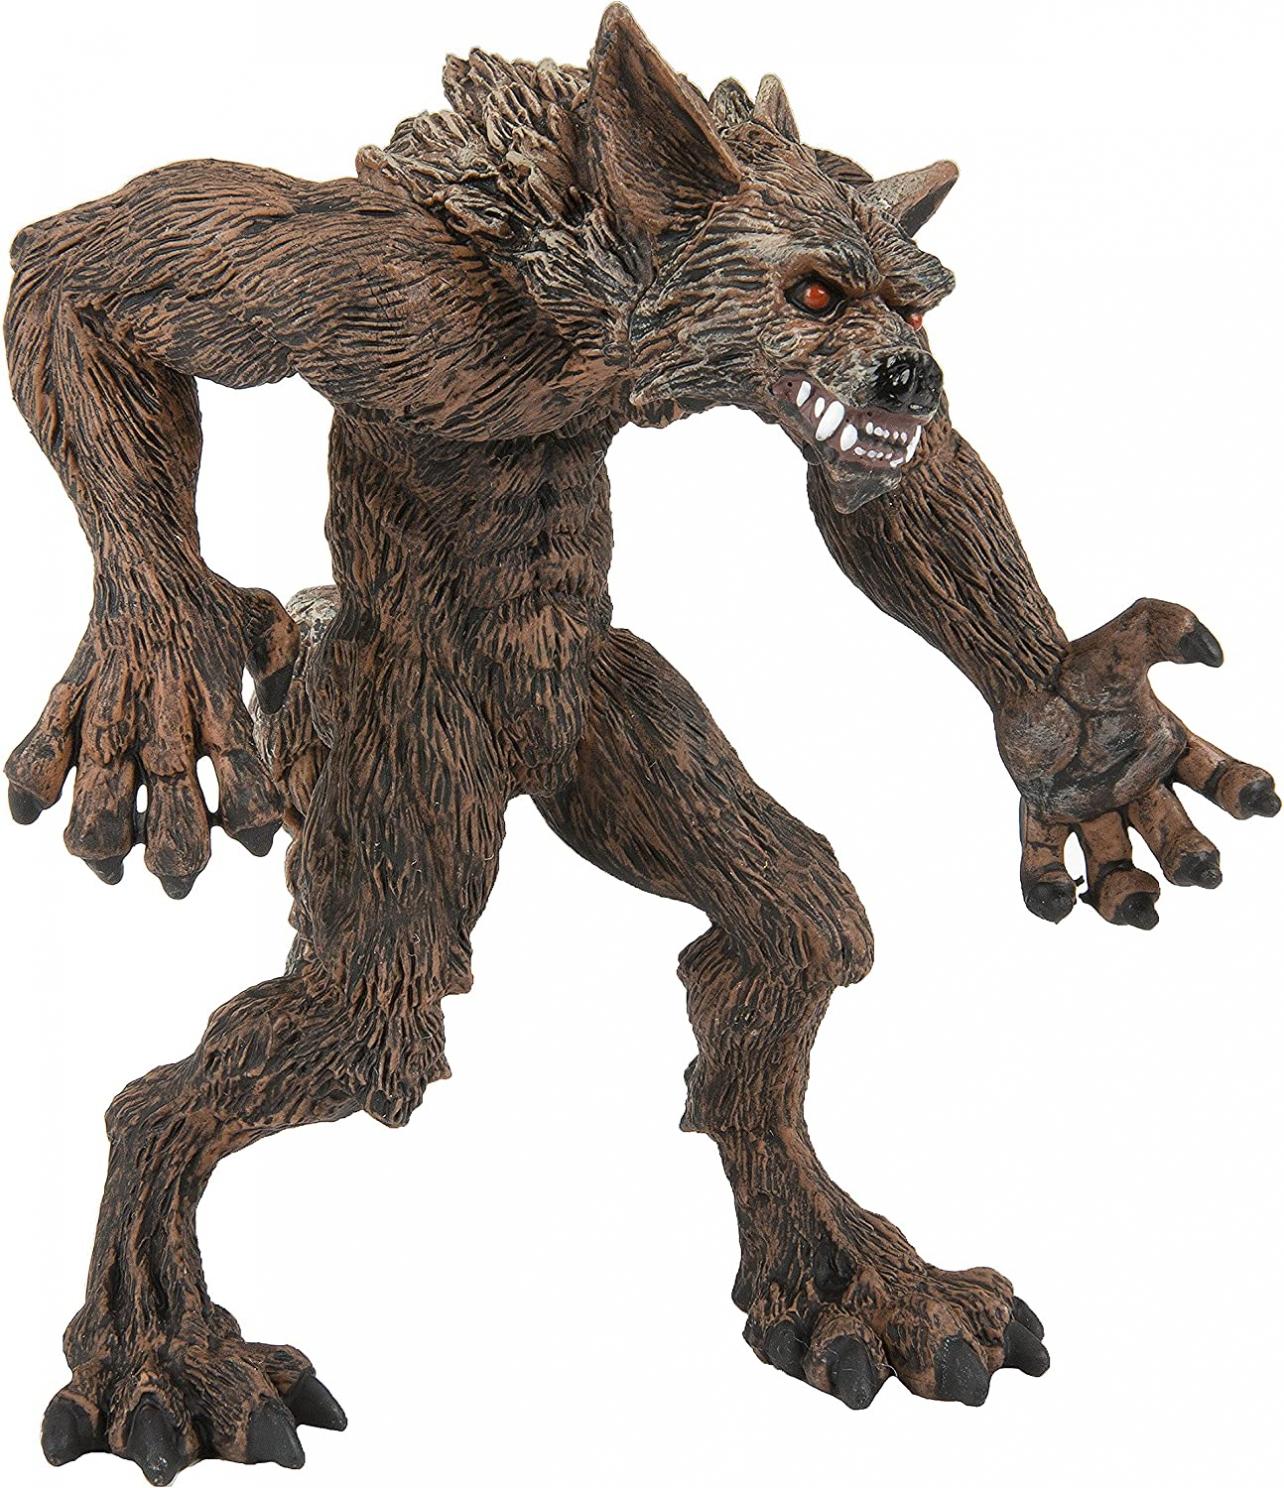 Safari Ltd Fantasy Collection – Werewolf – Realistic Hand Painted Toy Figurine Model - Quality Construction from Safe and BPA Free Materials - for Ages 3 and Up